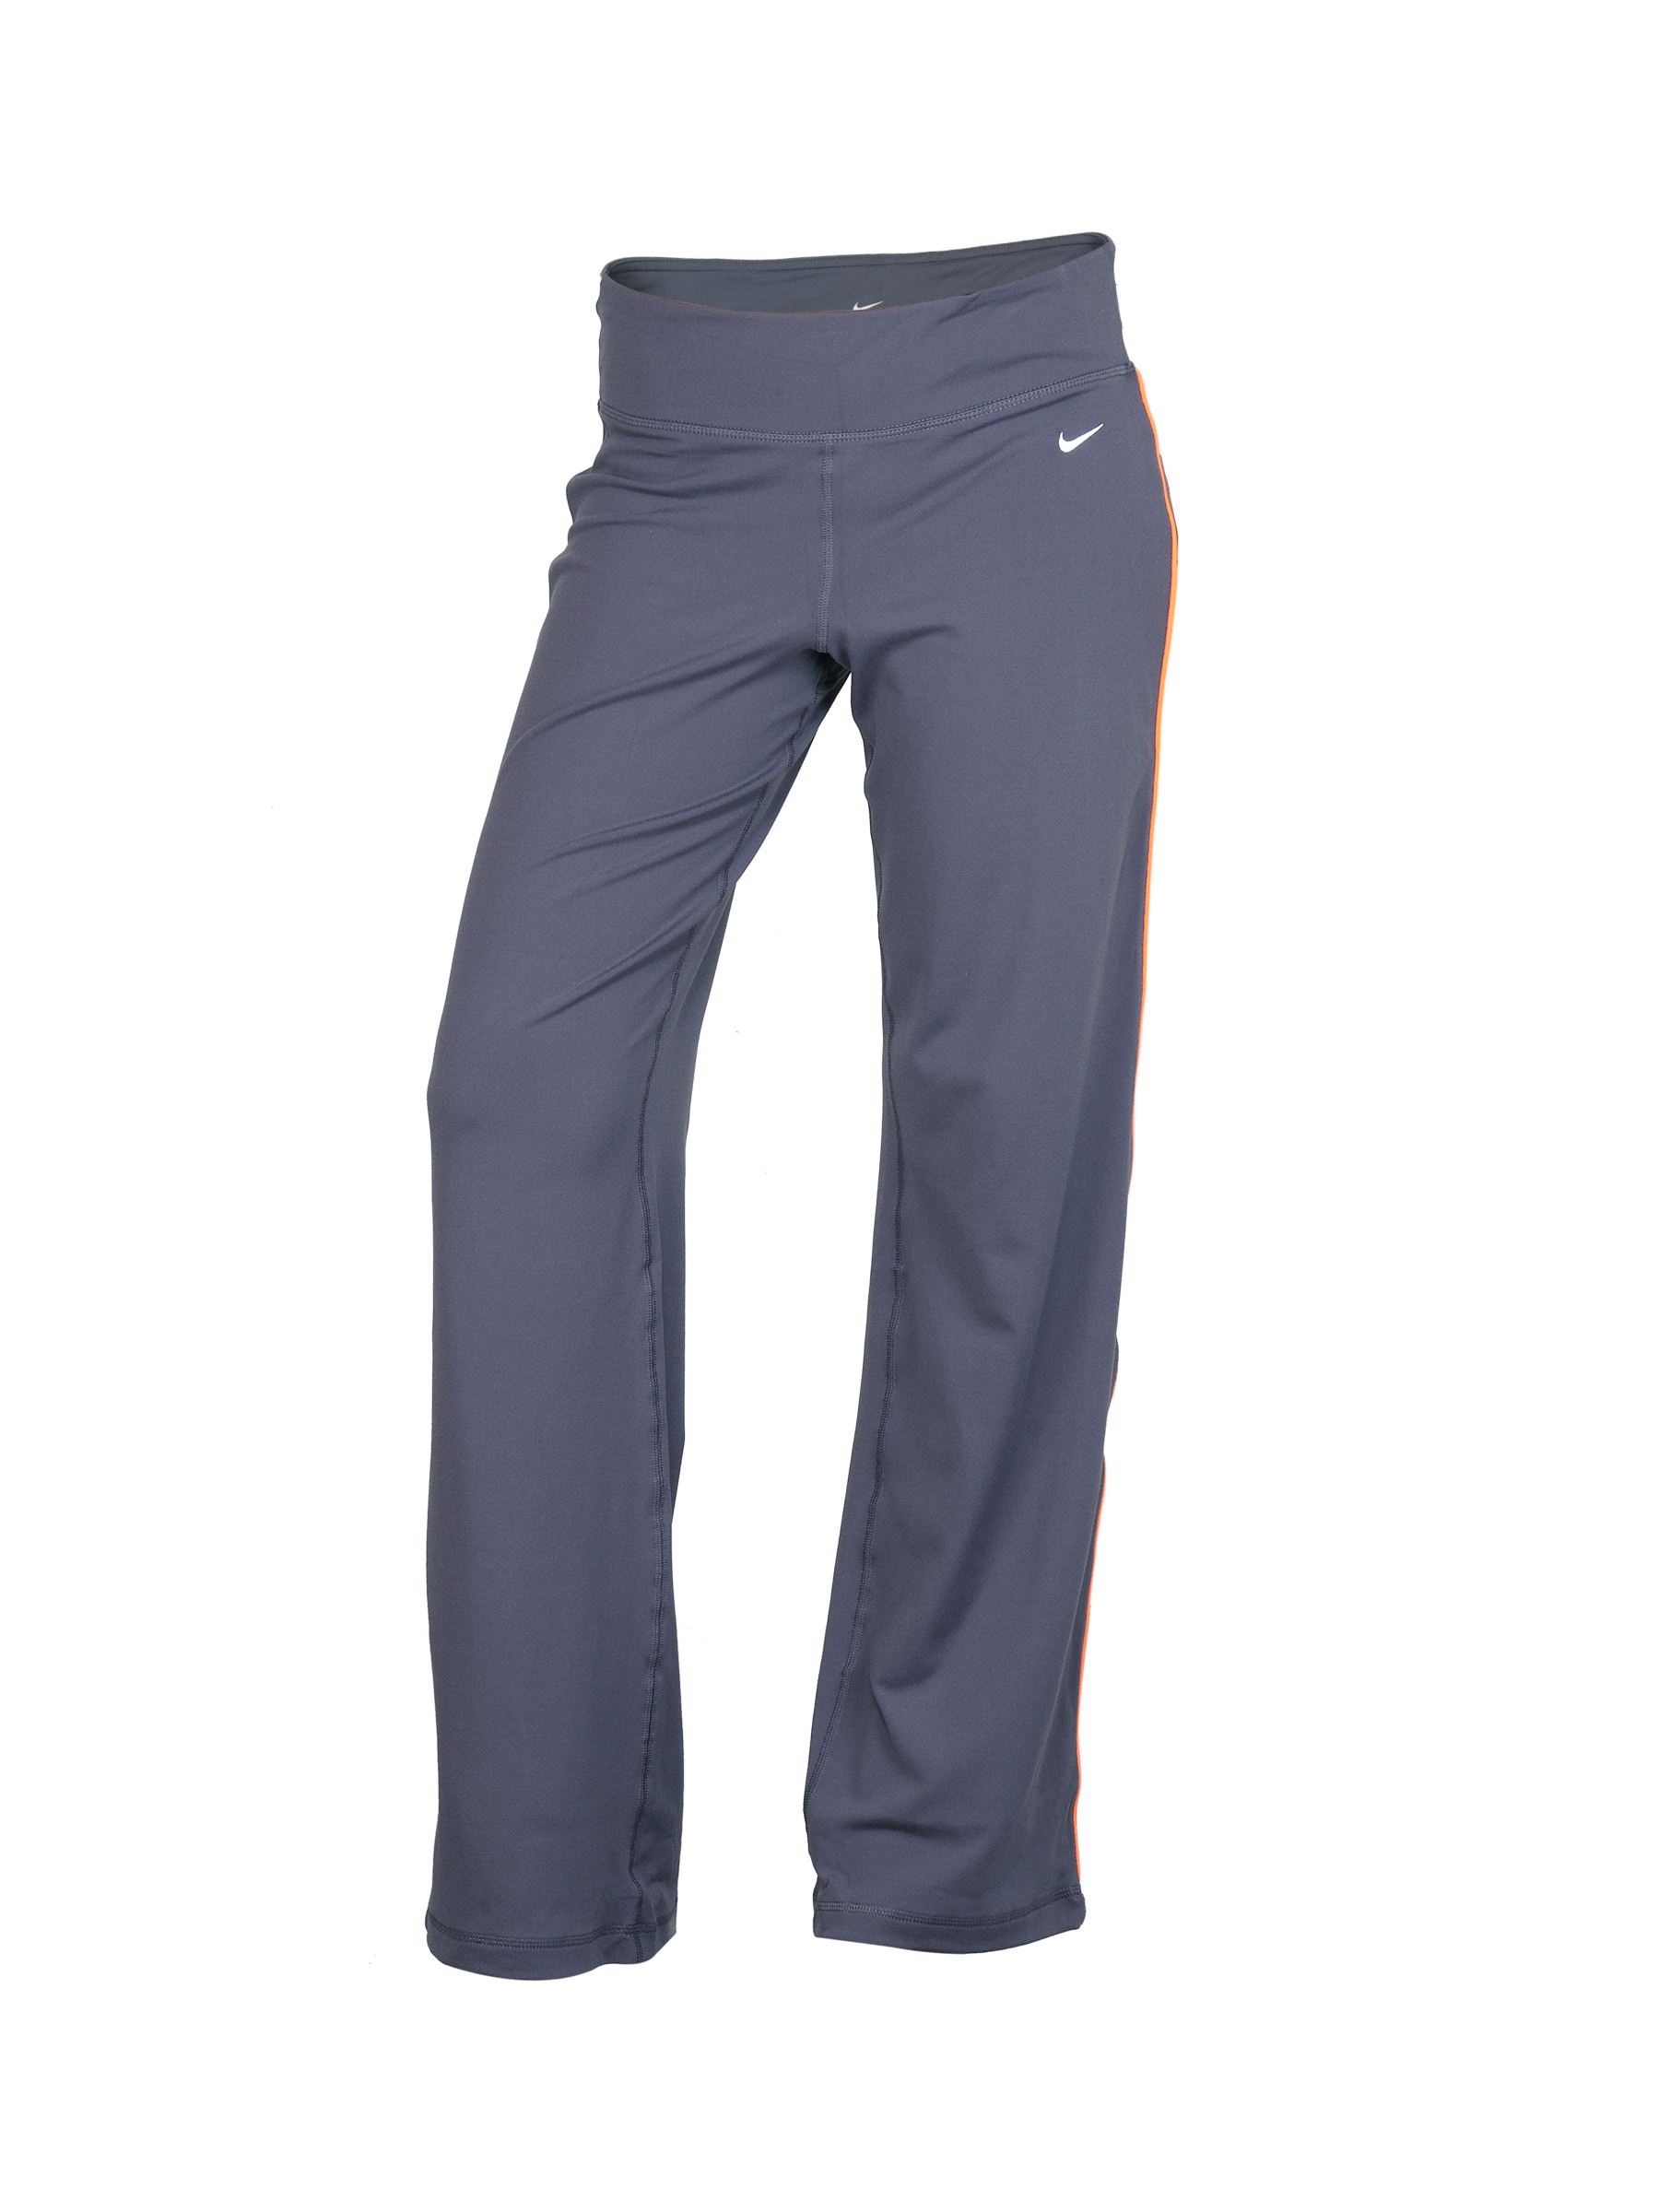 Nike Women's Be Strong Grey Track Pant